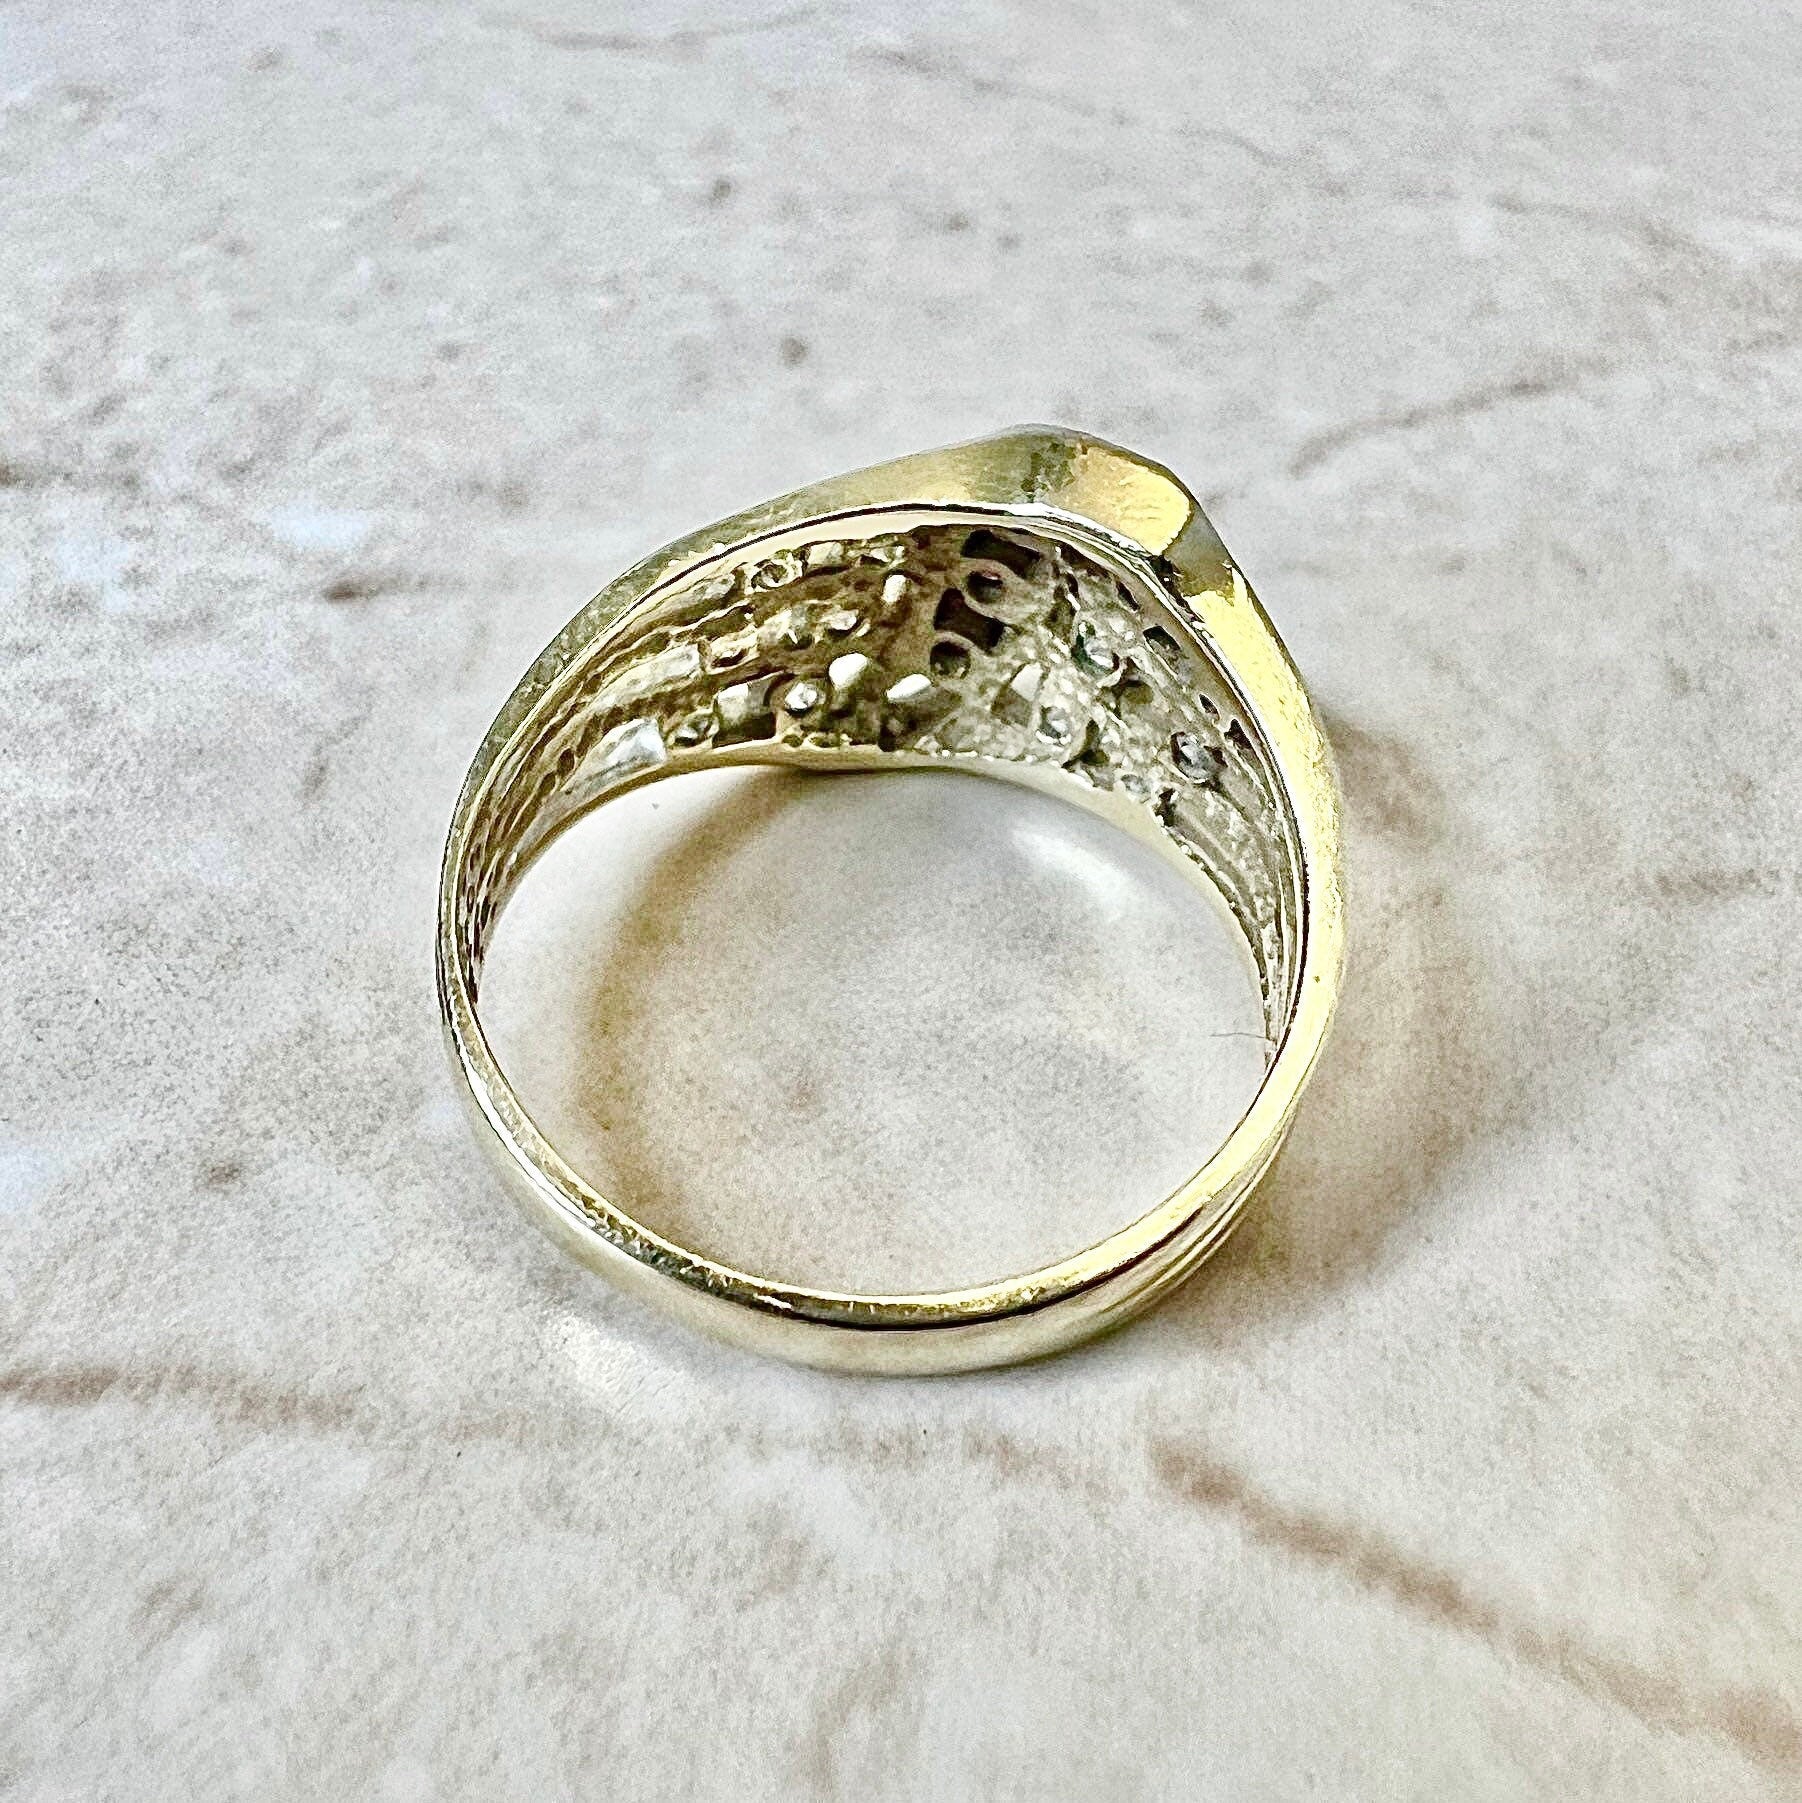 Vintage 14K Natural Ruby & Diamond Ring - Yellow Gold Cocktail Ring - July Birthstone - Birthday Gift For Her - Jewelry Sale - Size 6.75 US